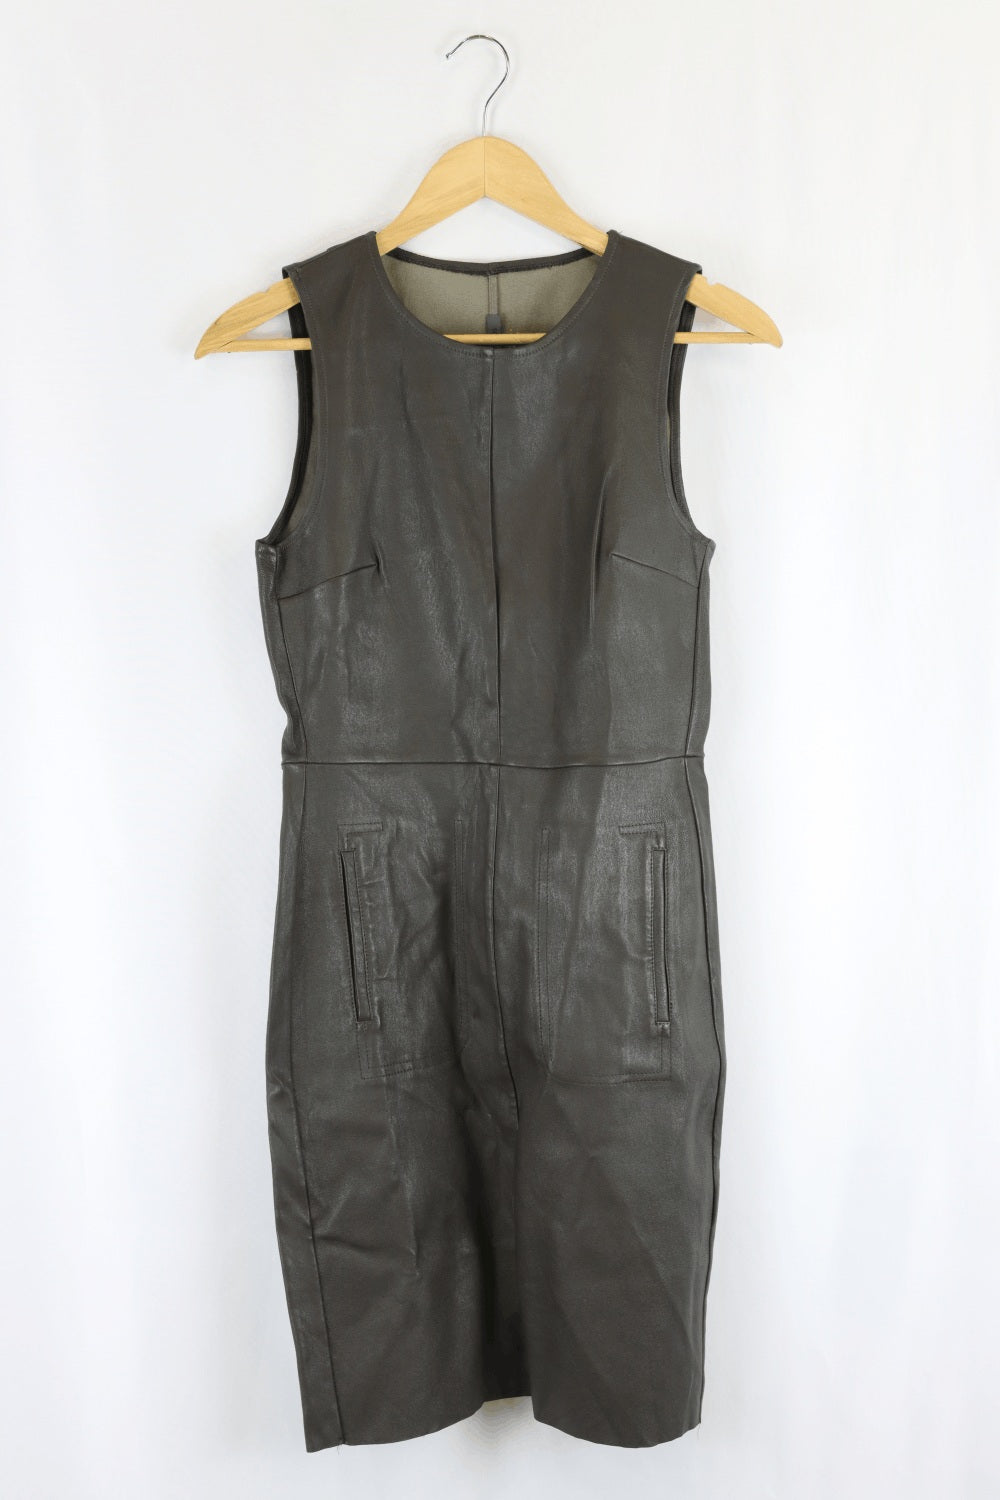 Scanlan Theodore Leather Brown Dress S